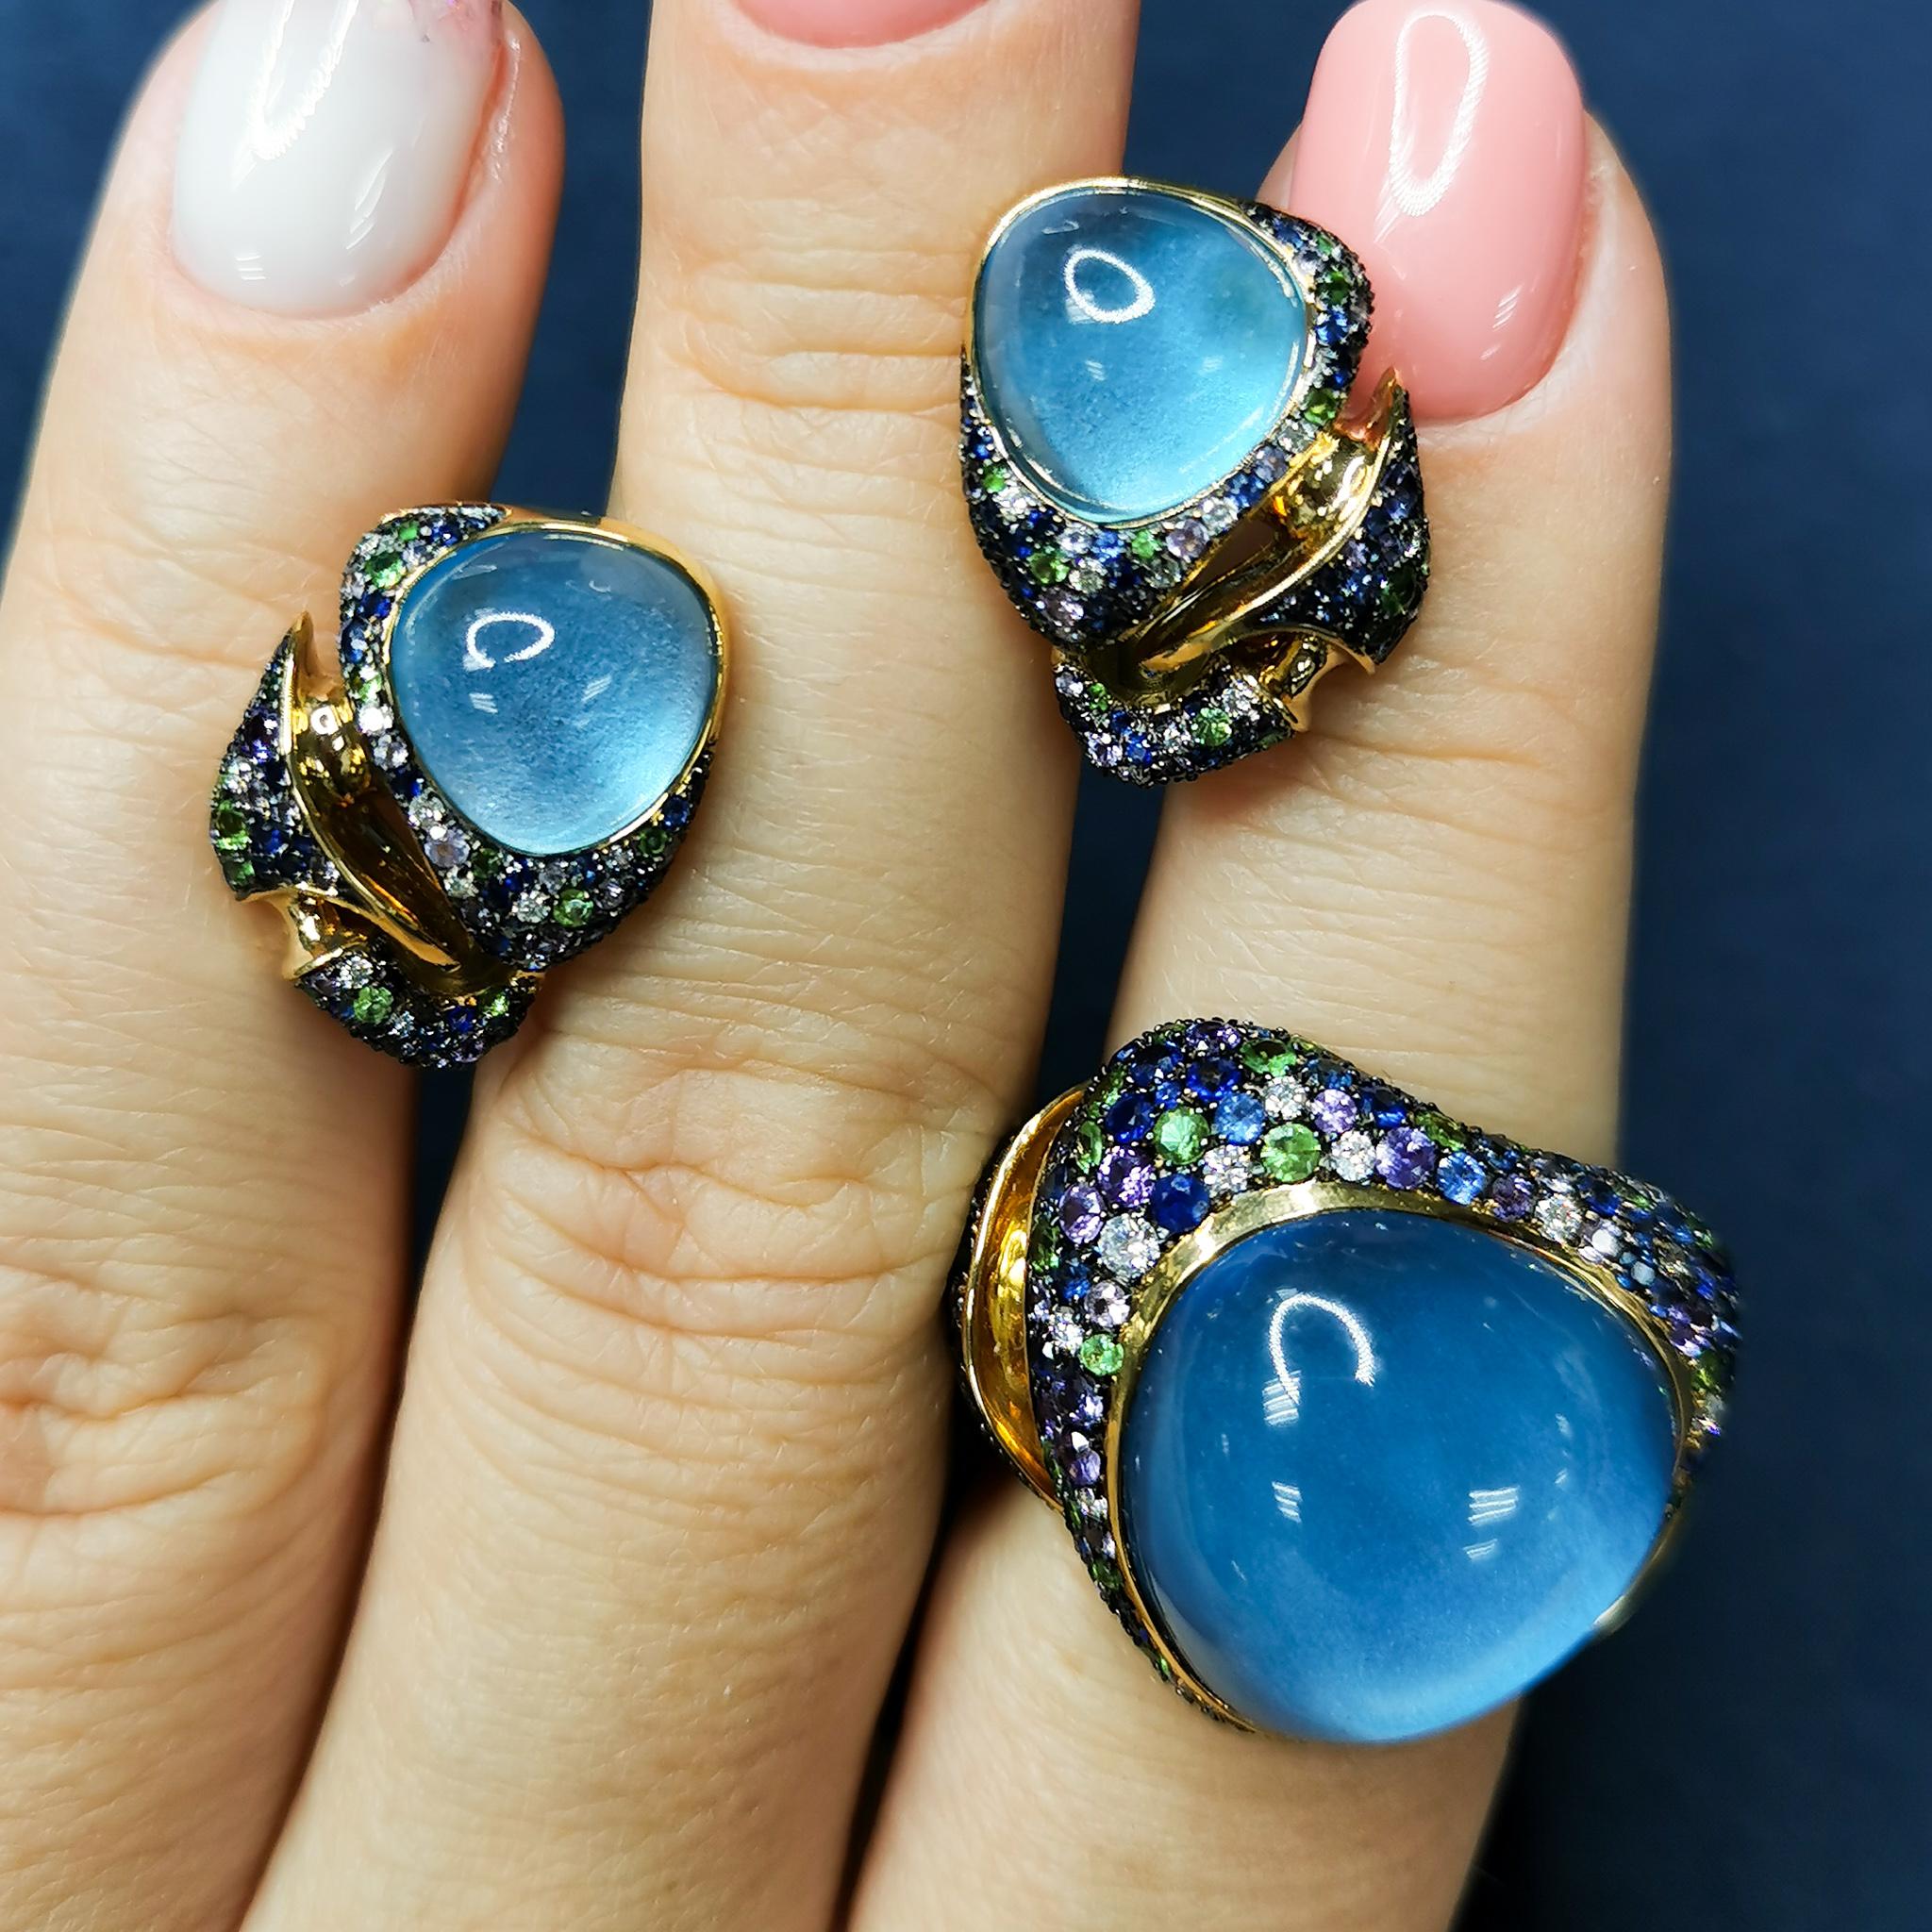 Swiss Topaz Tsavorites Diamonds Sapphires 18 Karat Yellow Gold Suite
All the colors of hot summer are collected in our Suite. Bright Tsavorites, Purple and Blue Sapphires, Diamonds, and a mixture of 18 Karat Yellow and Black Gold. All this is